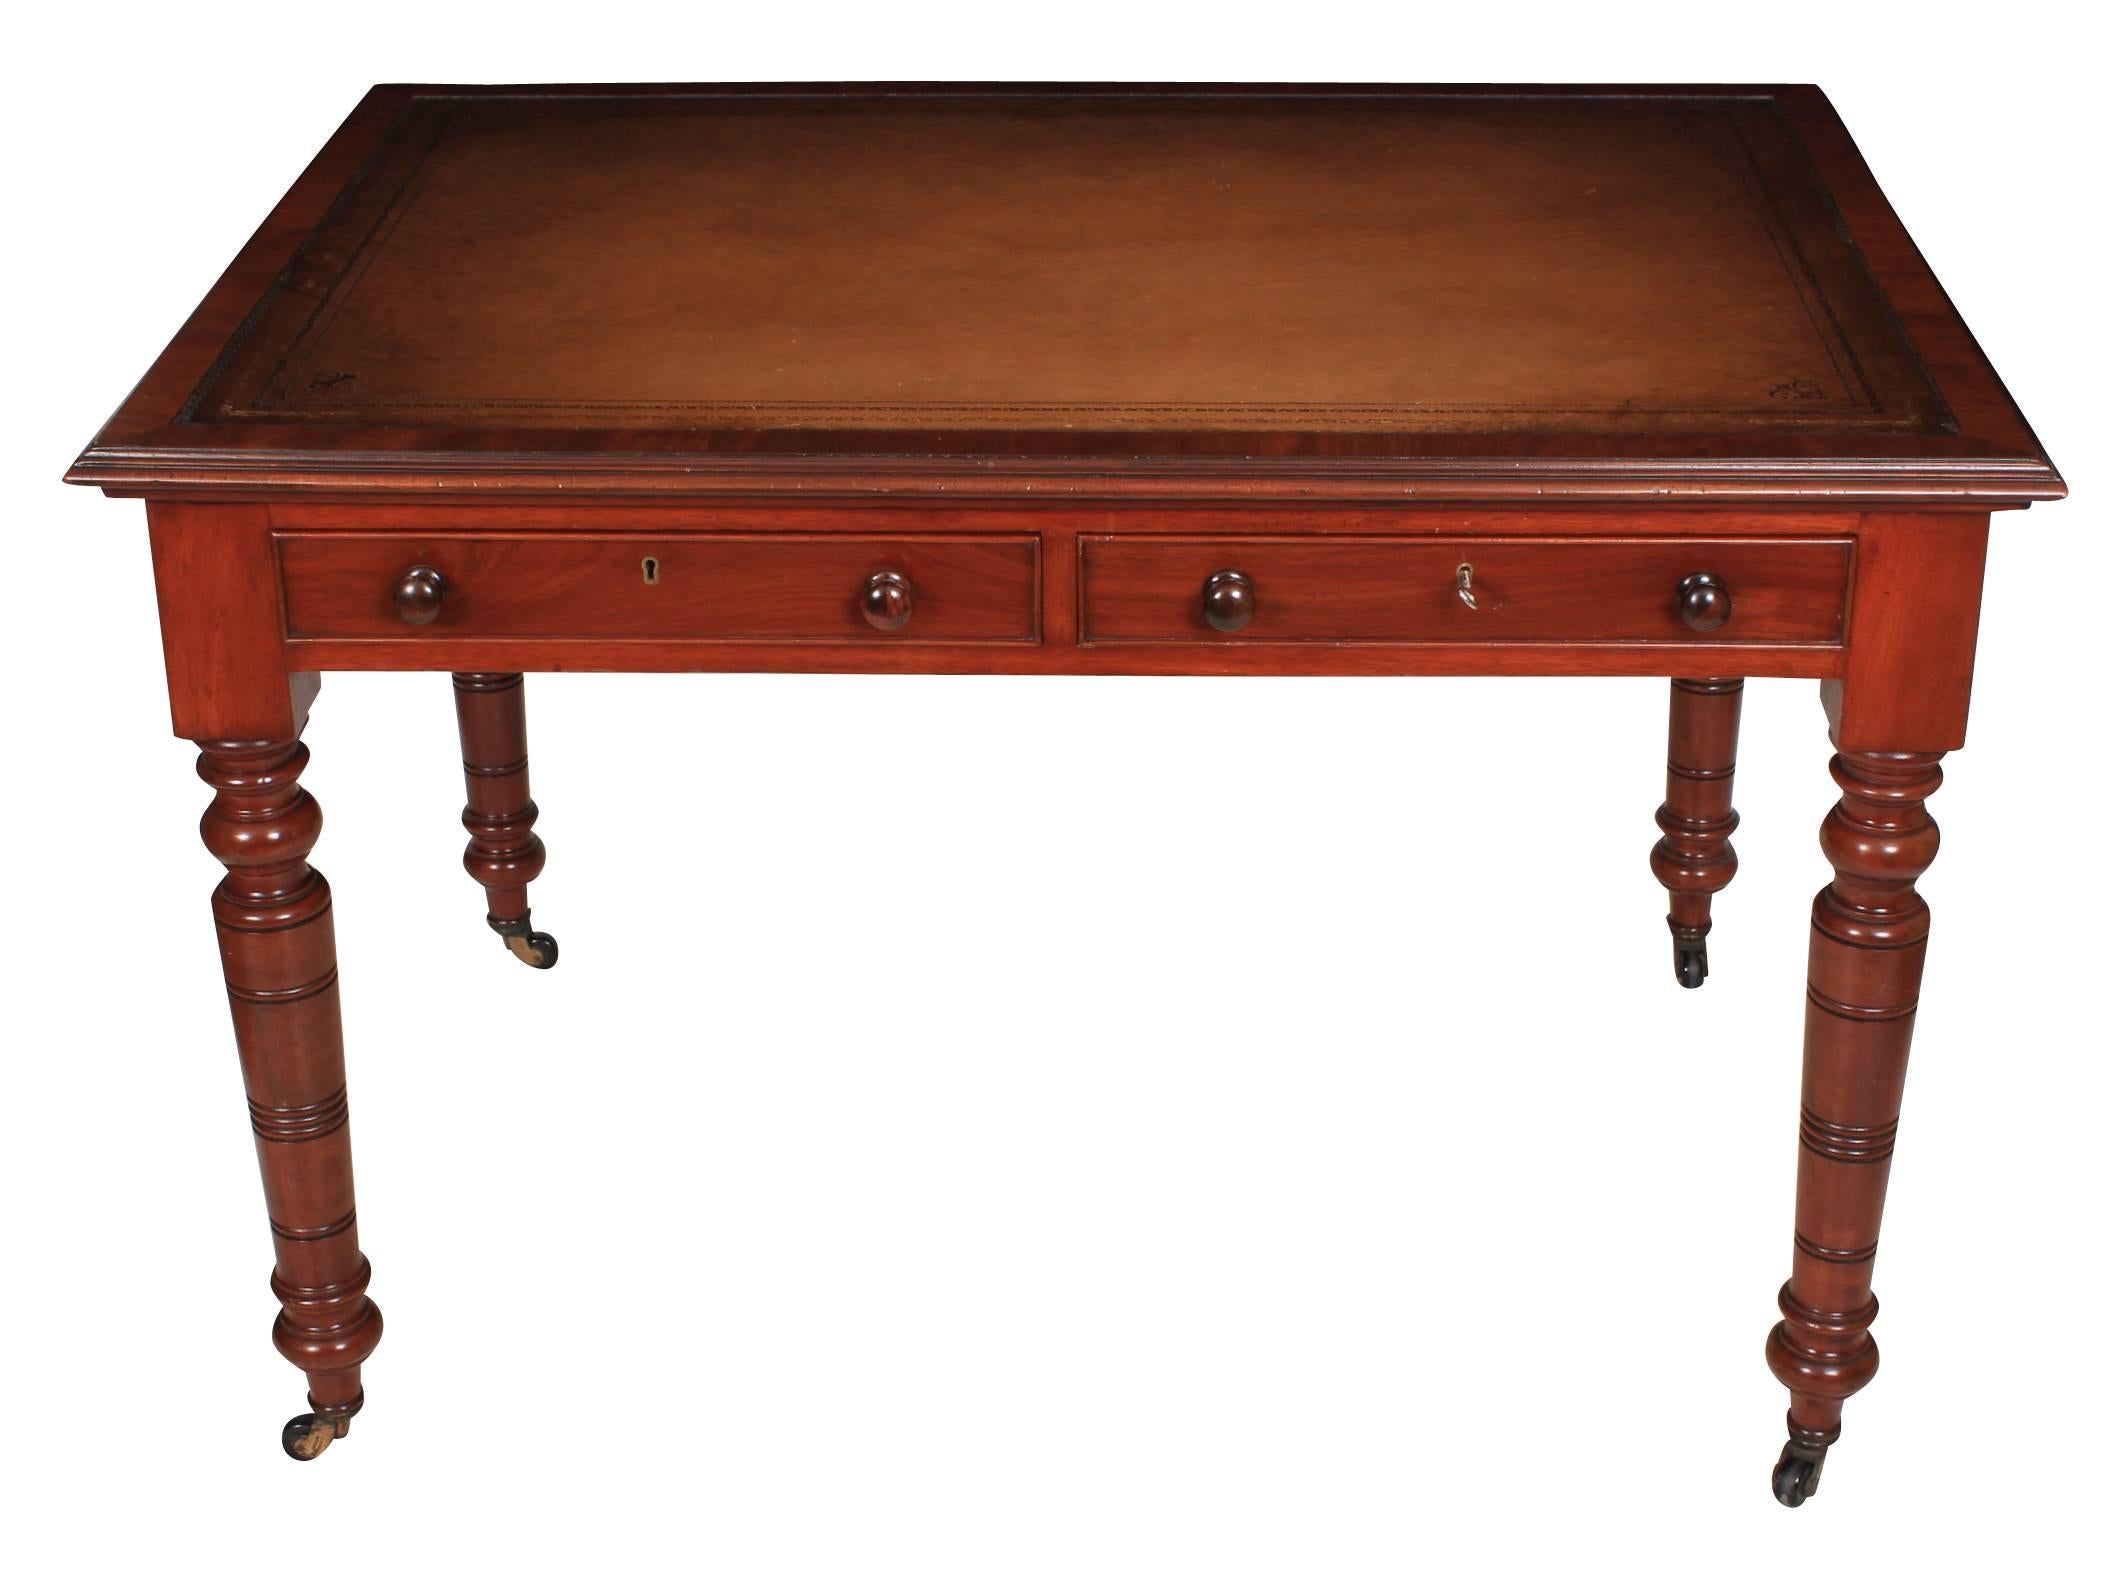 English, circa 1880.
This writing table is in fantastic condition. It has a mahogany top with a hand dyed leather inset writing surface.
Two drawers on the front of good quality mahogany dovetailed construction, with bun handles and cock-beaded